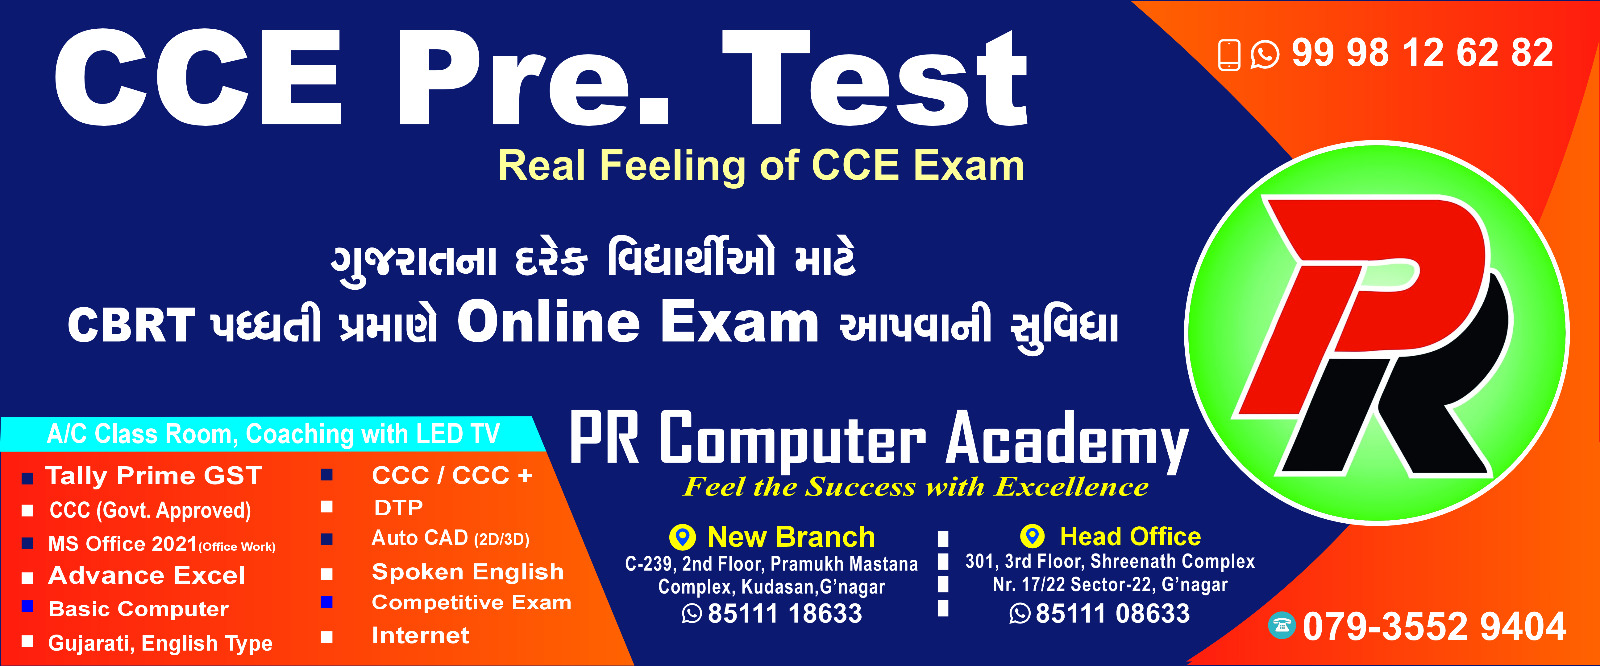 CCE Pre. TEST